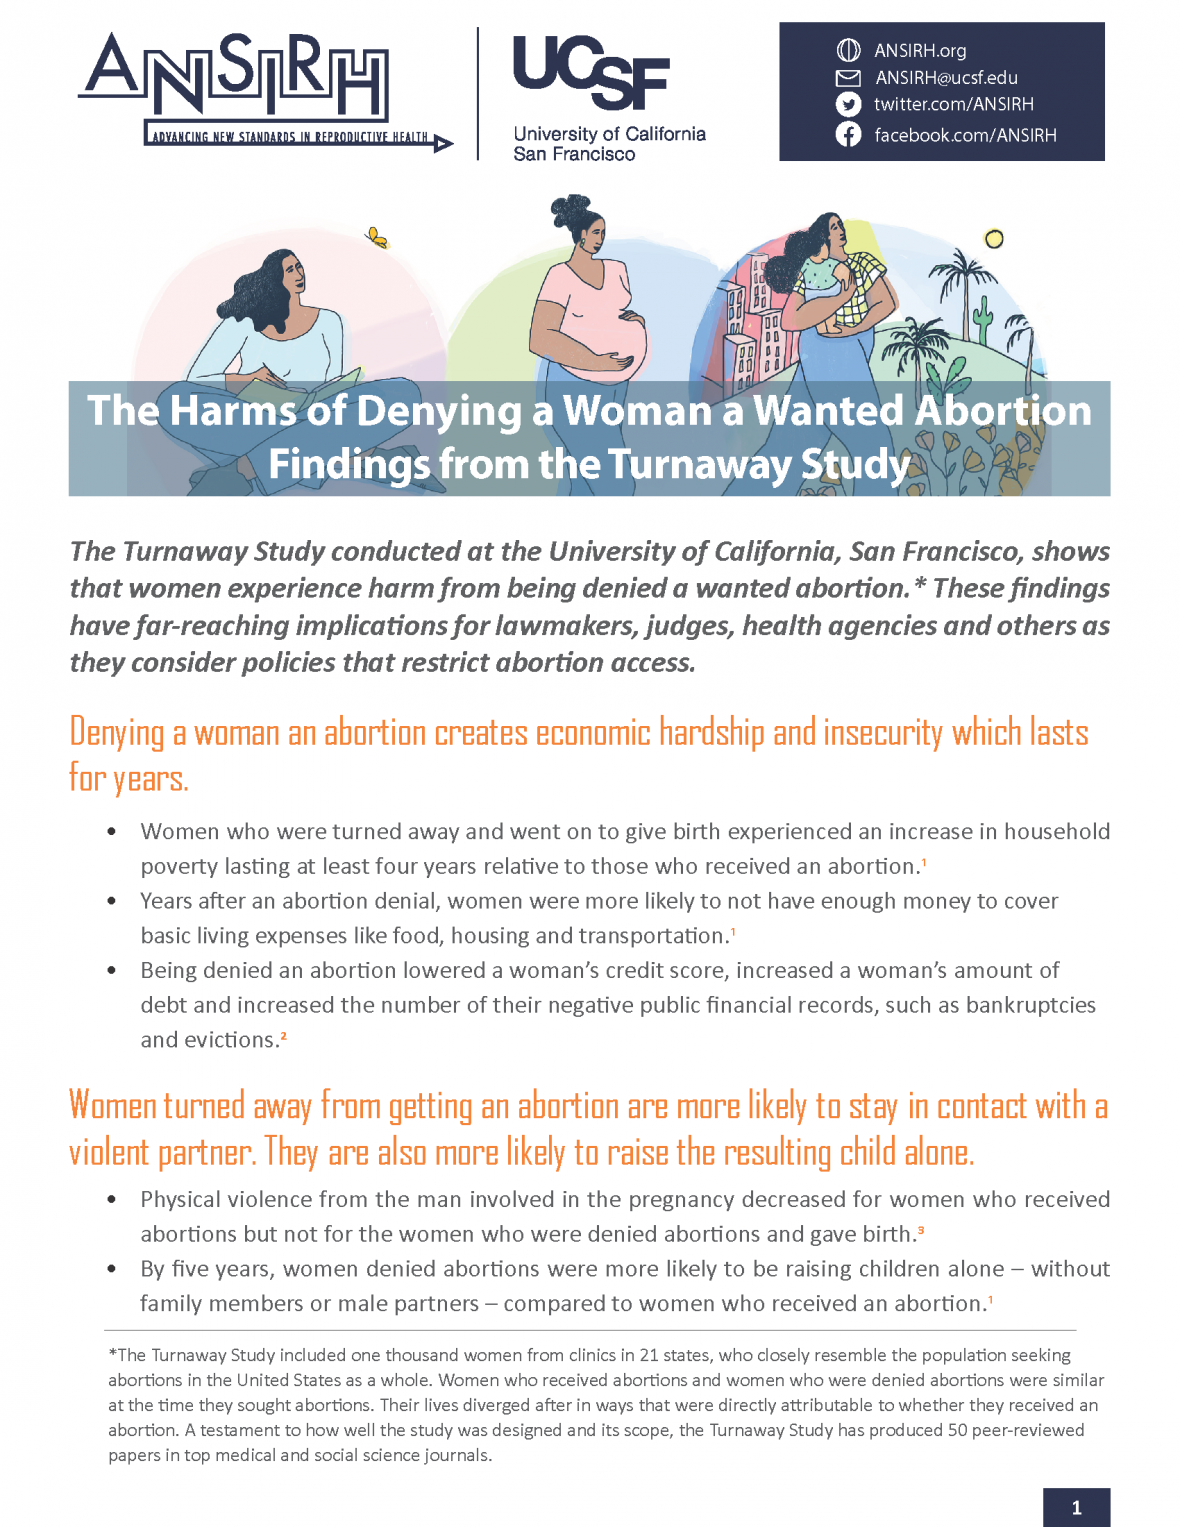 Factsheet on harms of denying someone a wanted abortion